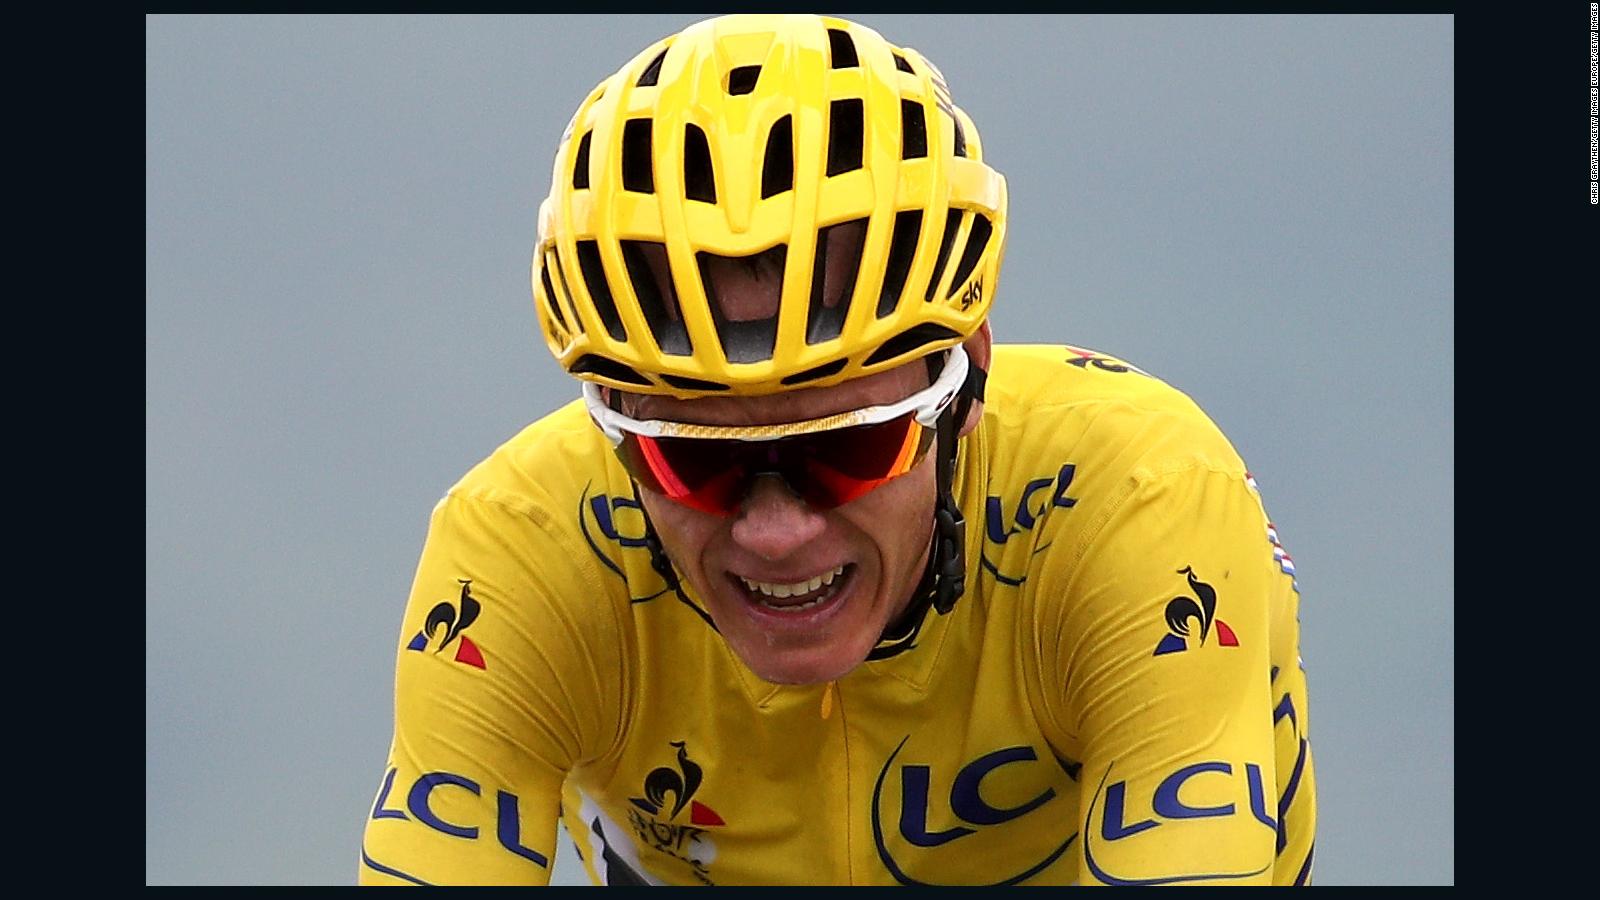 Chris Froome backlash Major blow to anti doping fight says